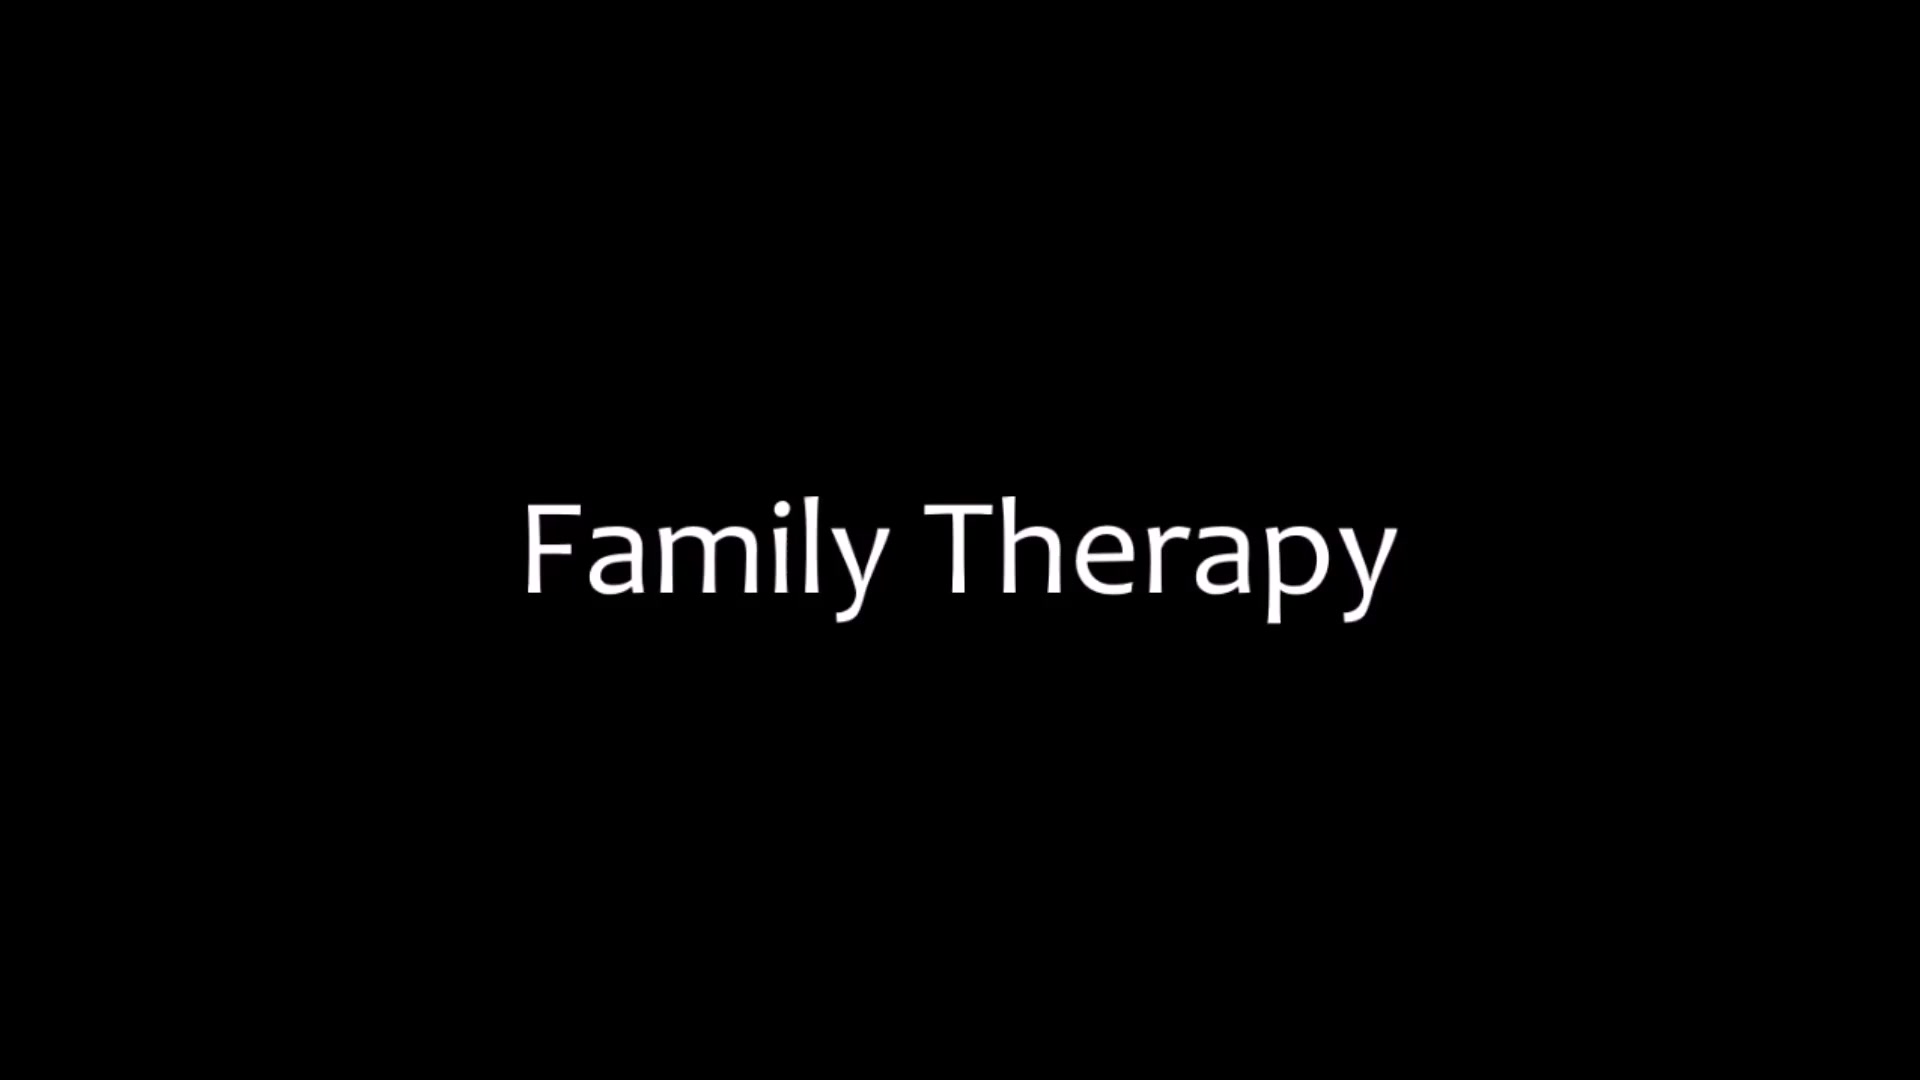 Family therapy new. Фэмили терапия Алекс Адамс. Family Therapy на русском.